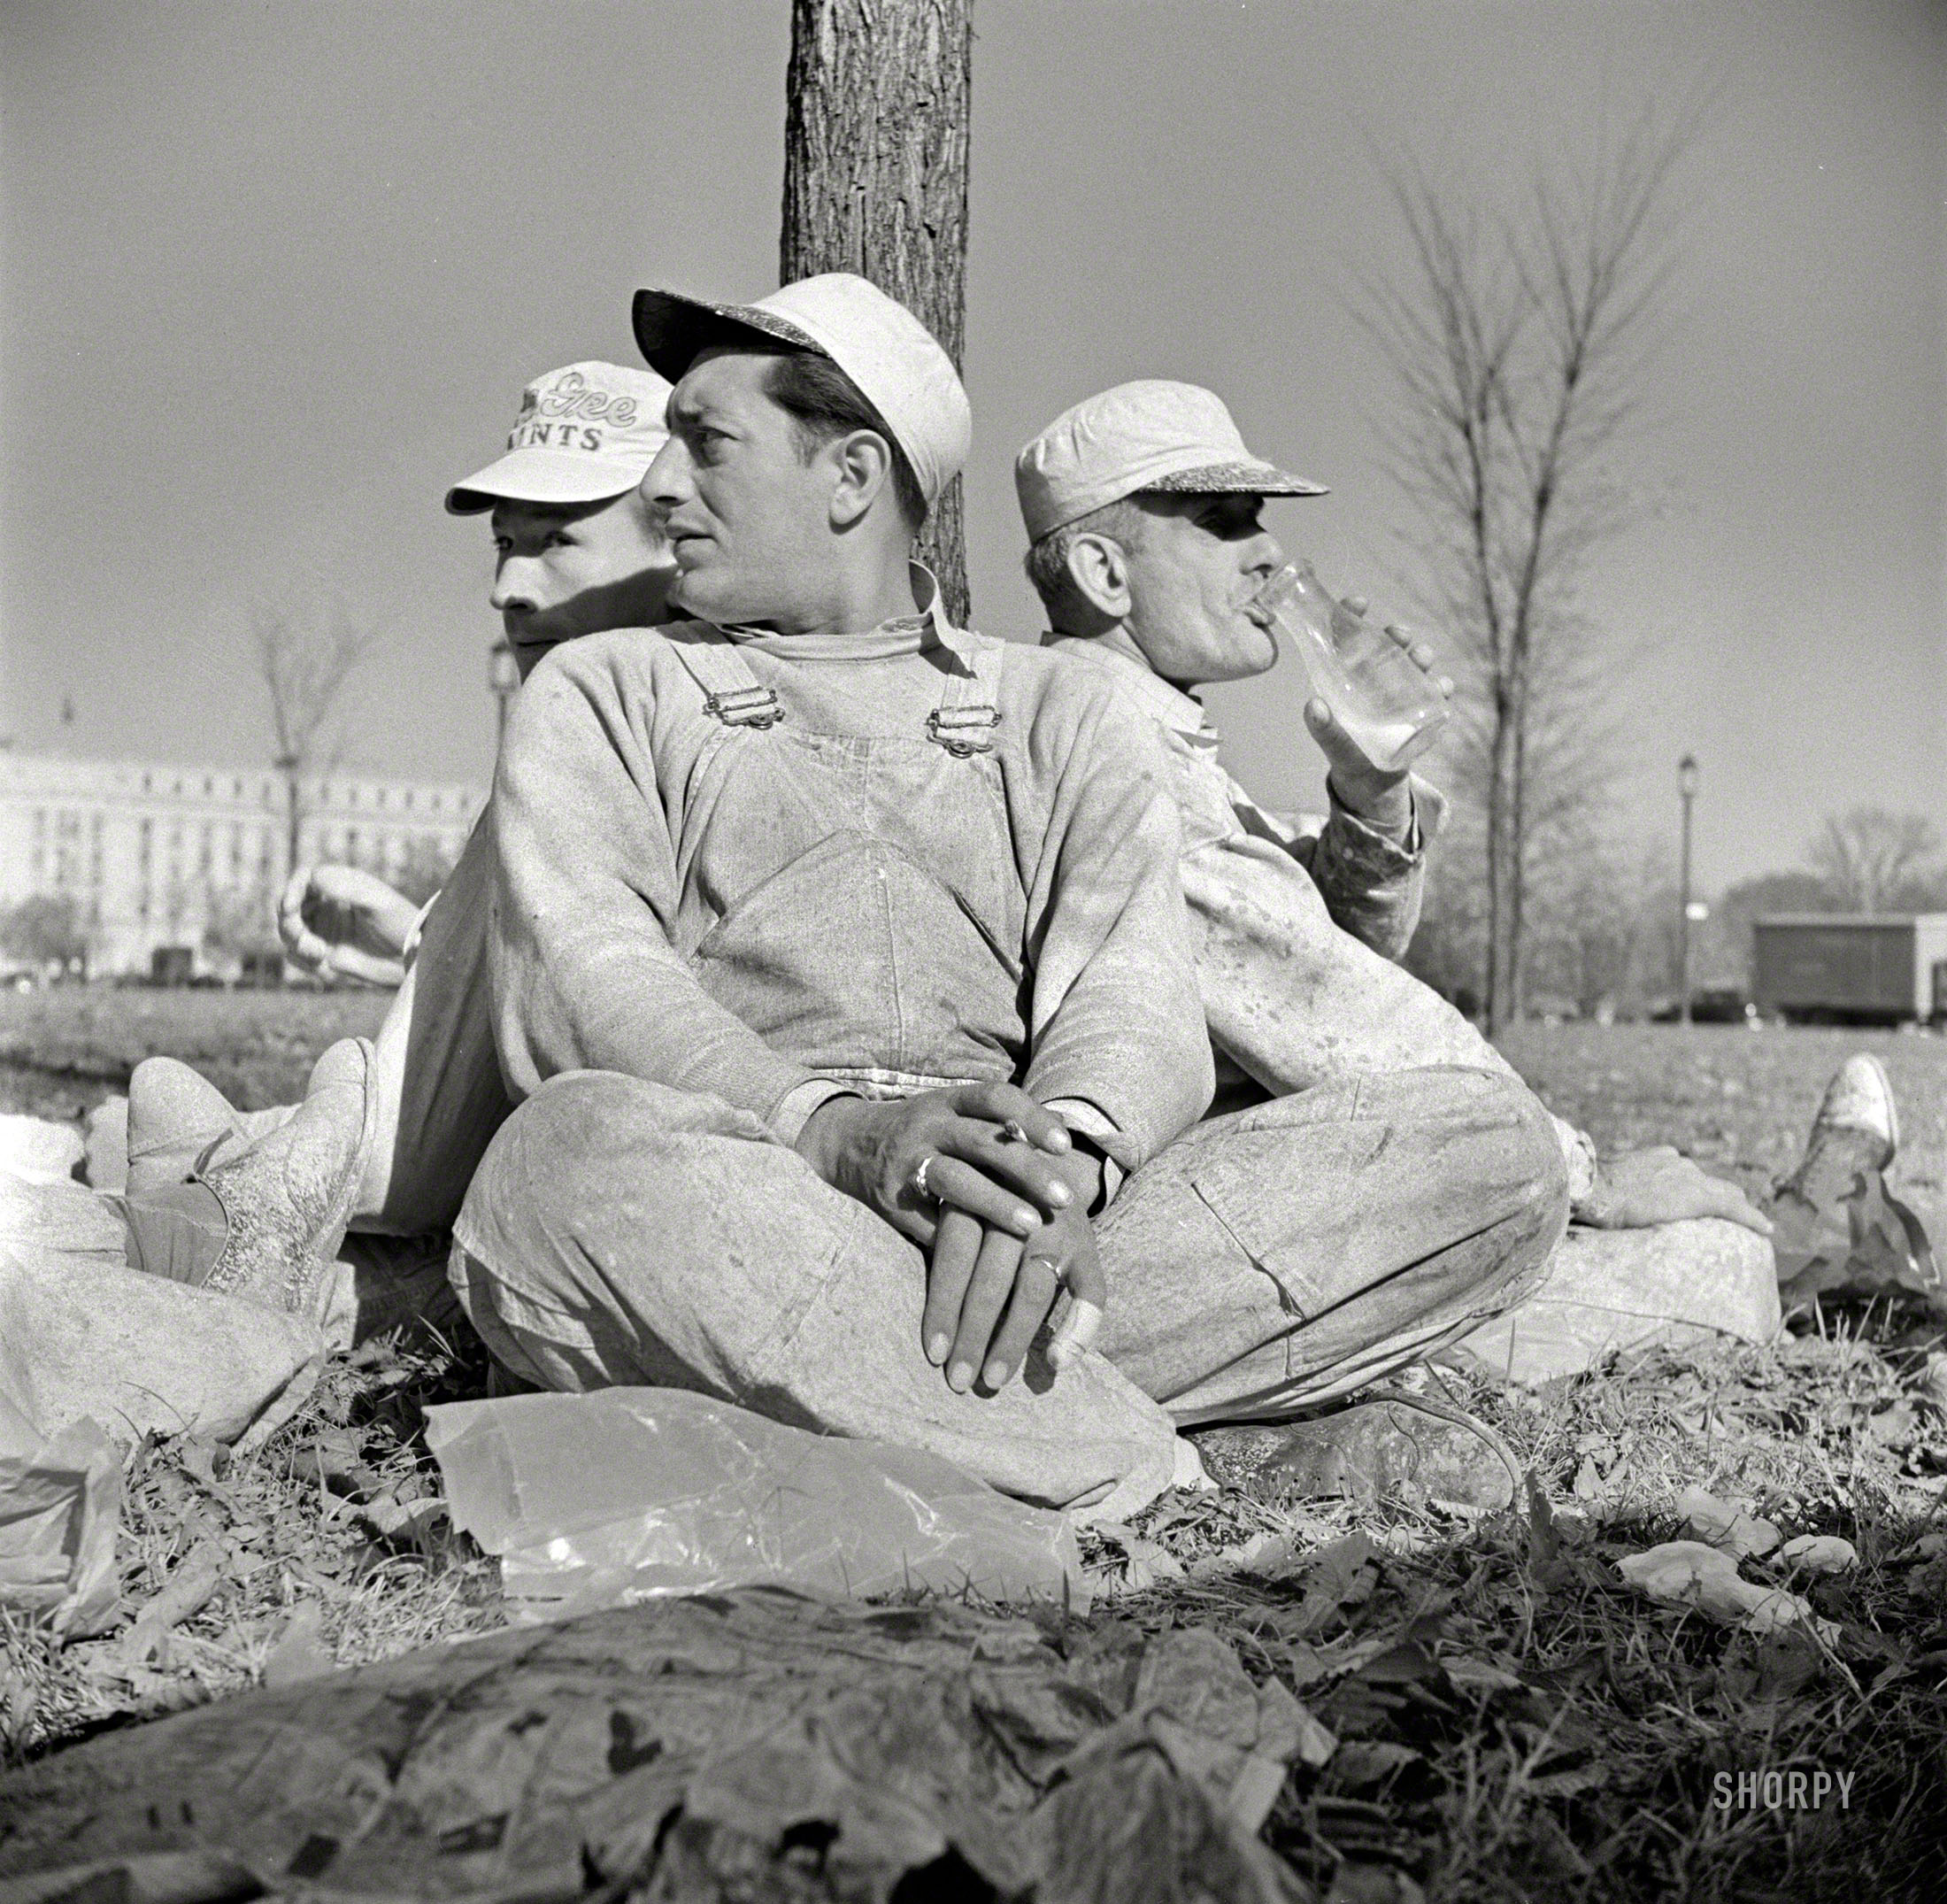 December 1941. "Workmen at lunch hour on emergency office space construction job. Washington, D.C." Period details: milk bottle, waxed paper, painters' caps. Medium-format nitrate negative by John Collier. View full size.